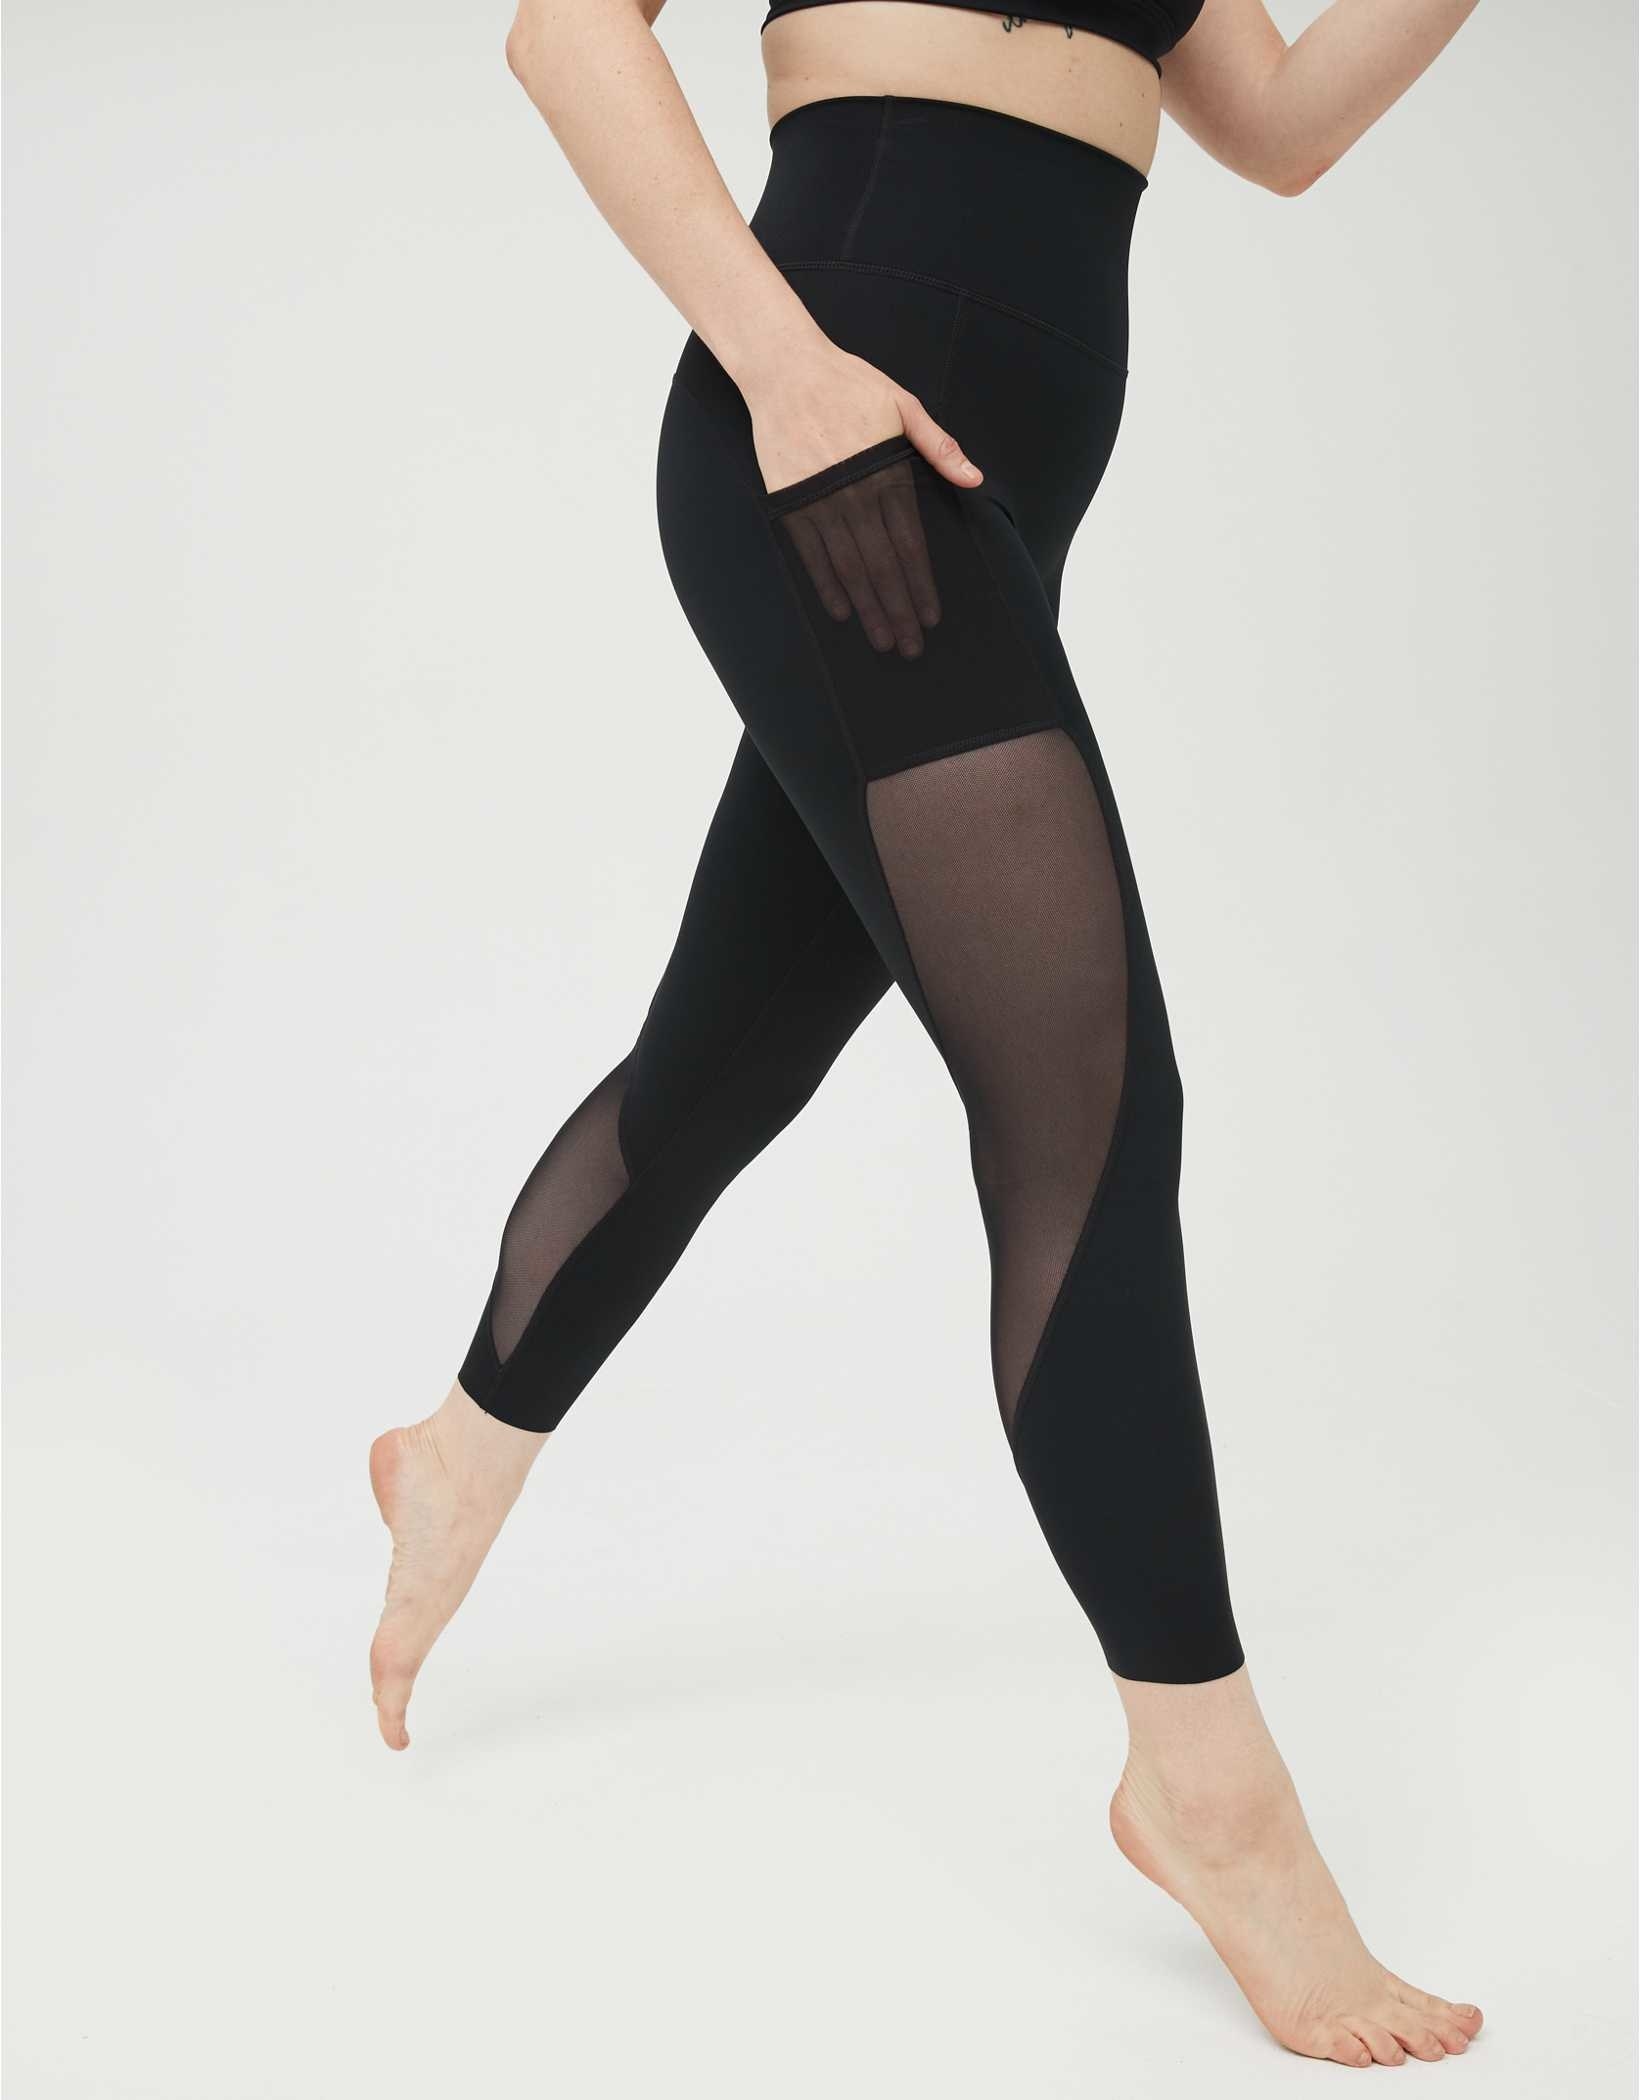 Model in black leggings with pockets and mesh paneling on the sides